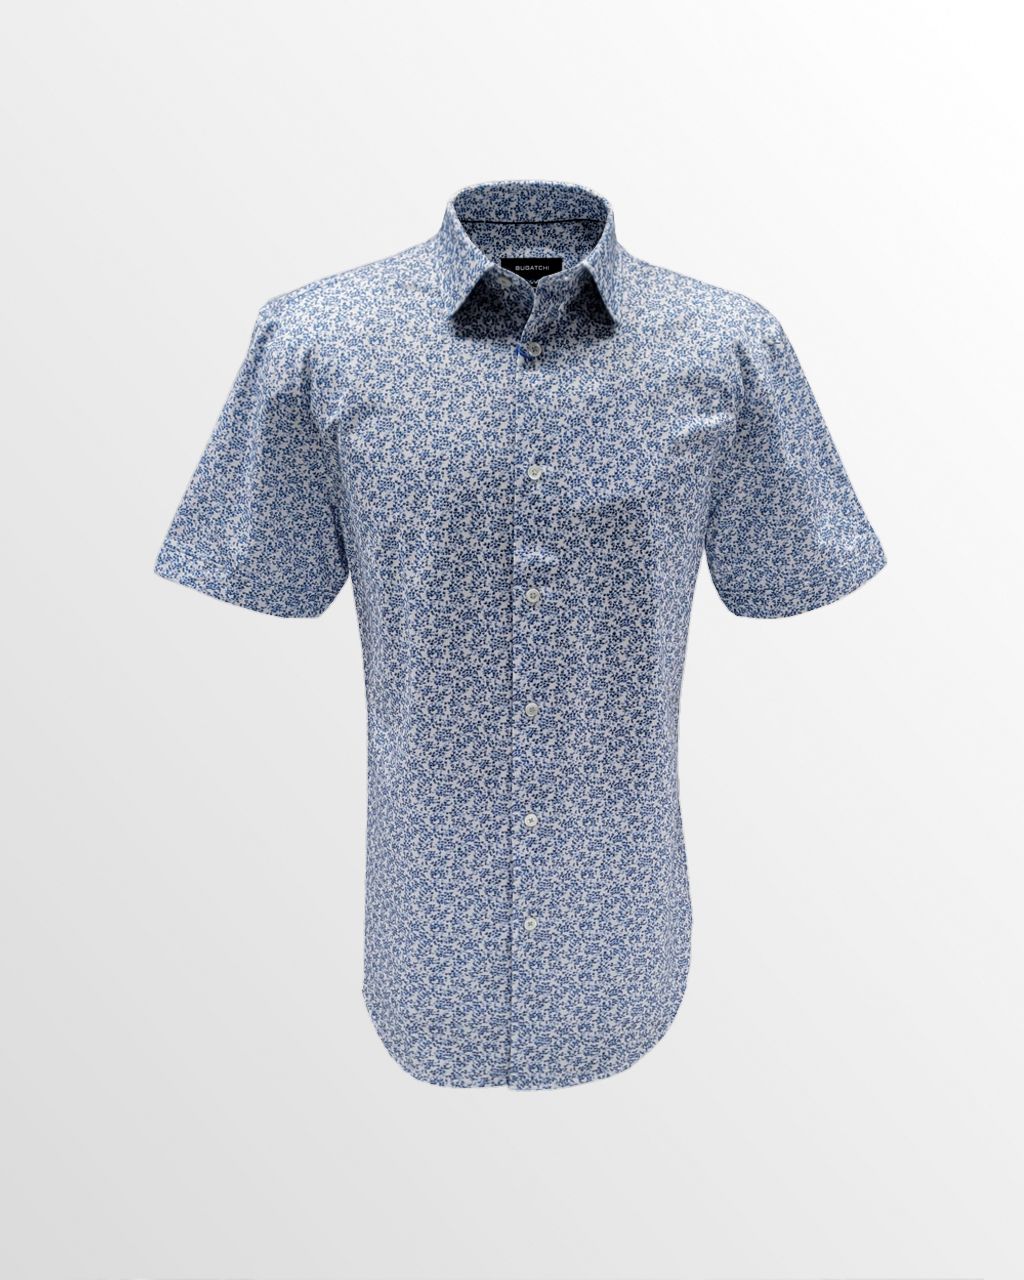 Bugatchi OoohCotton Casual Shirt in Blue Micro Fern Leaves